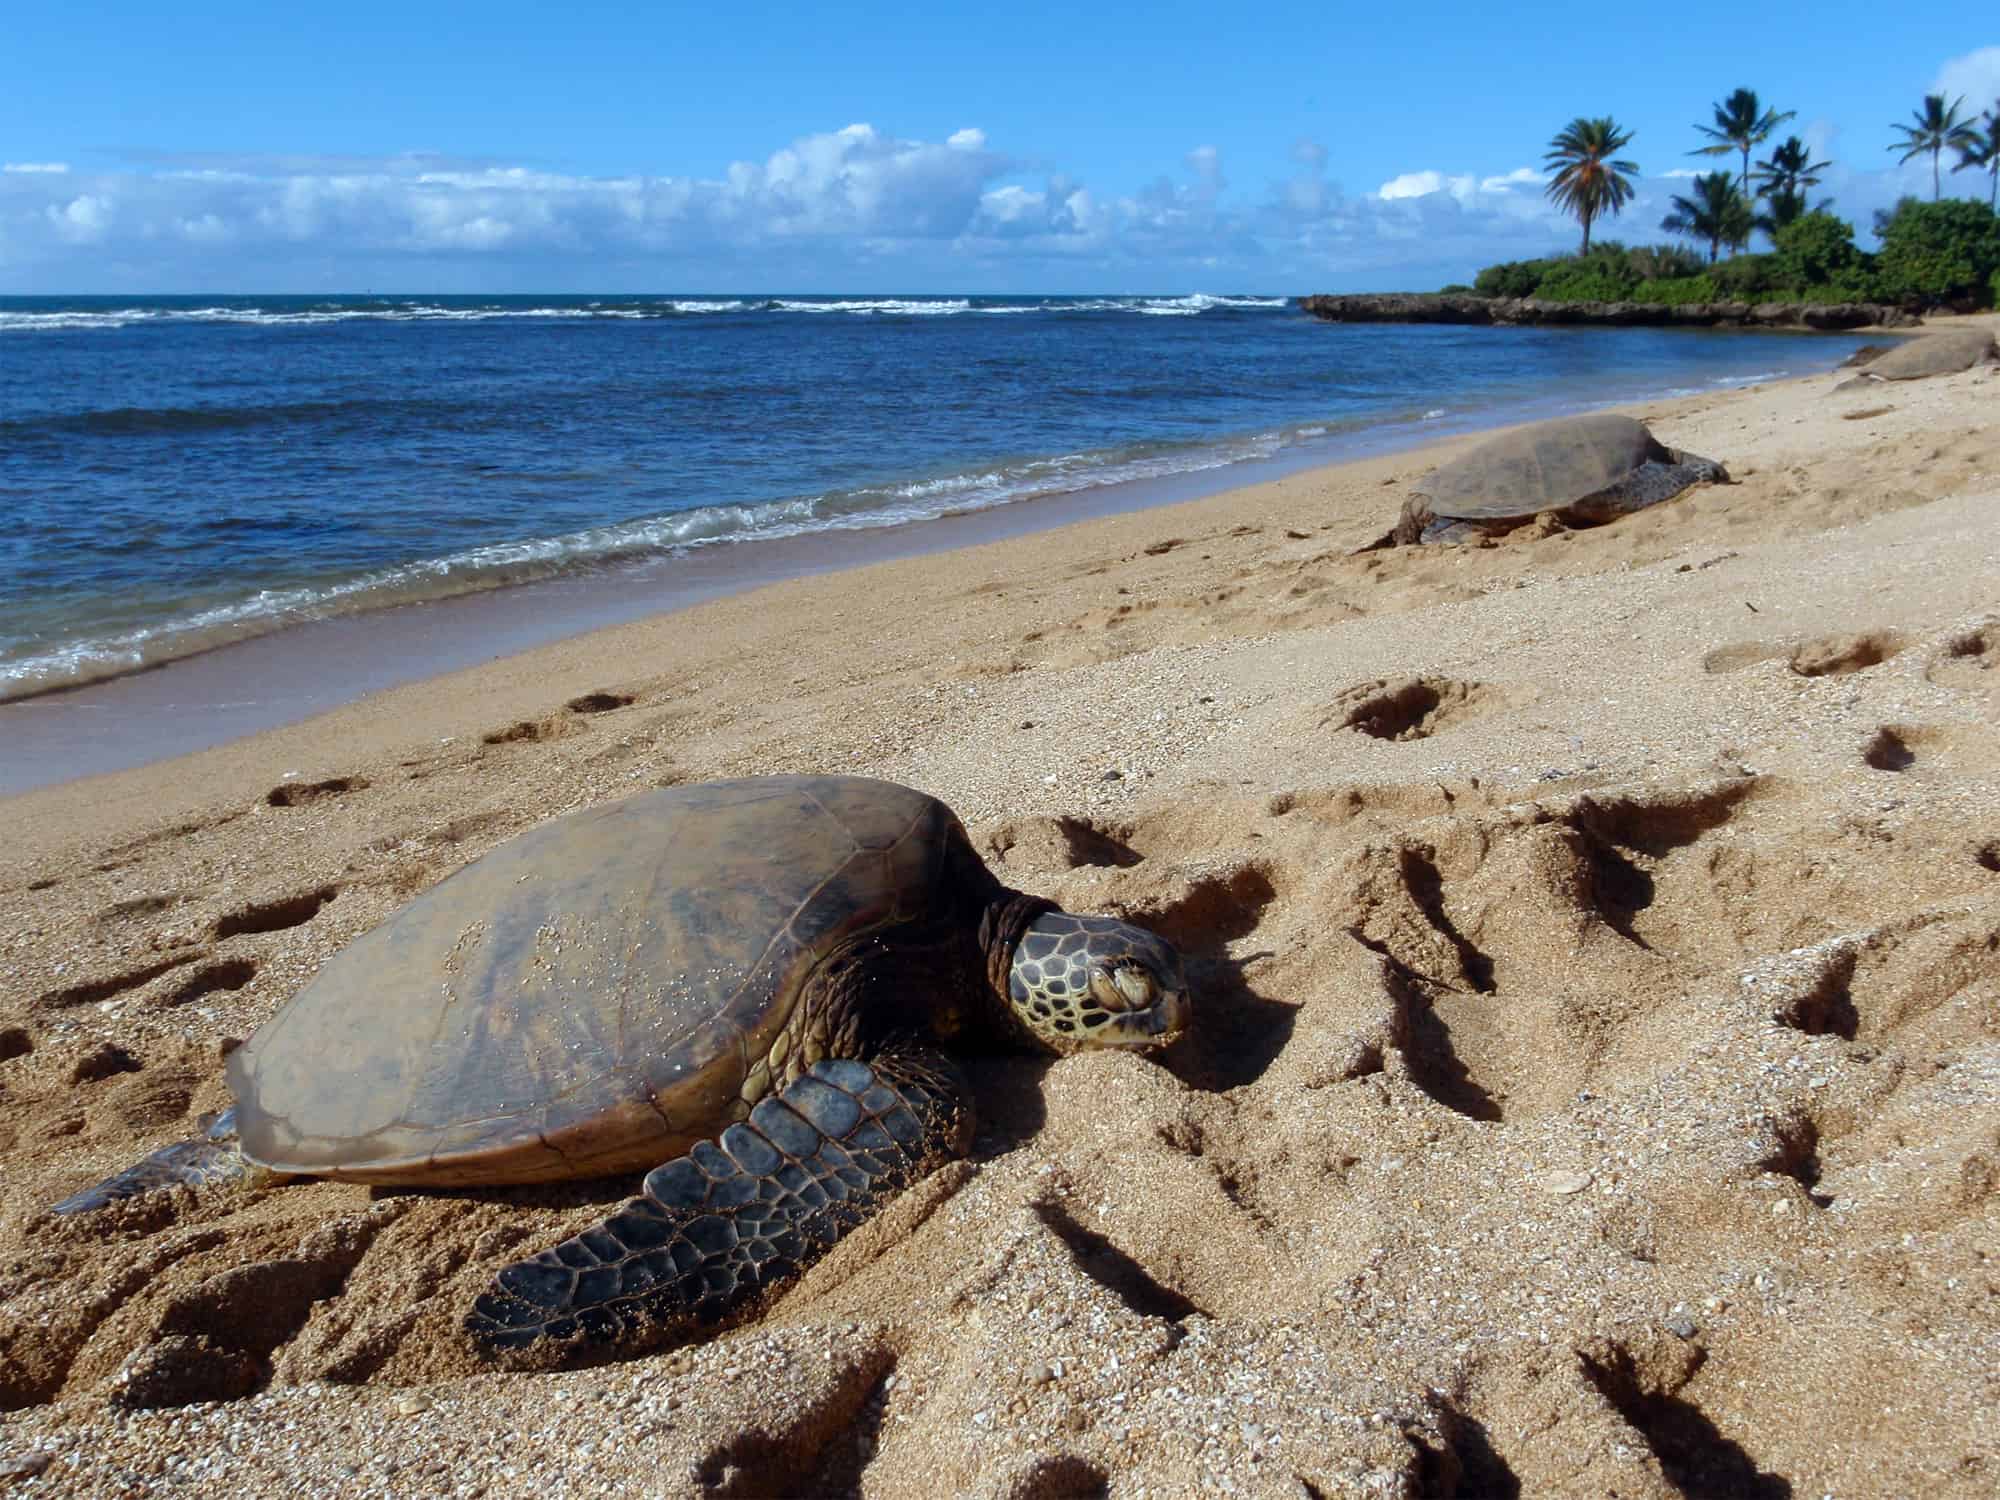 Fun facts about sea turtles - females build nests above high tide line